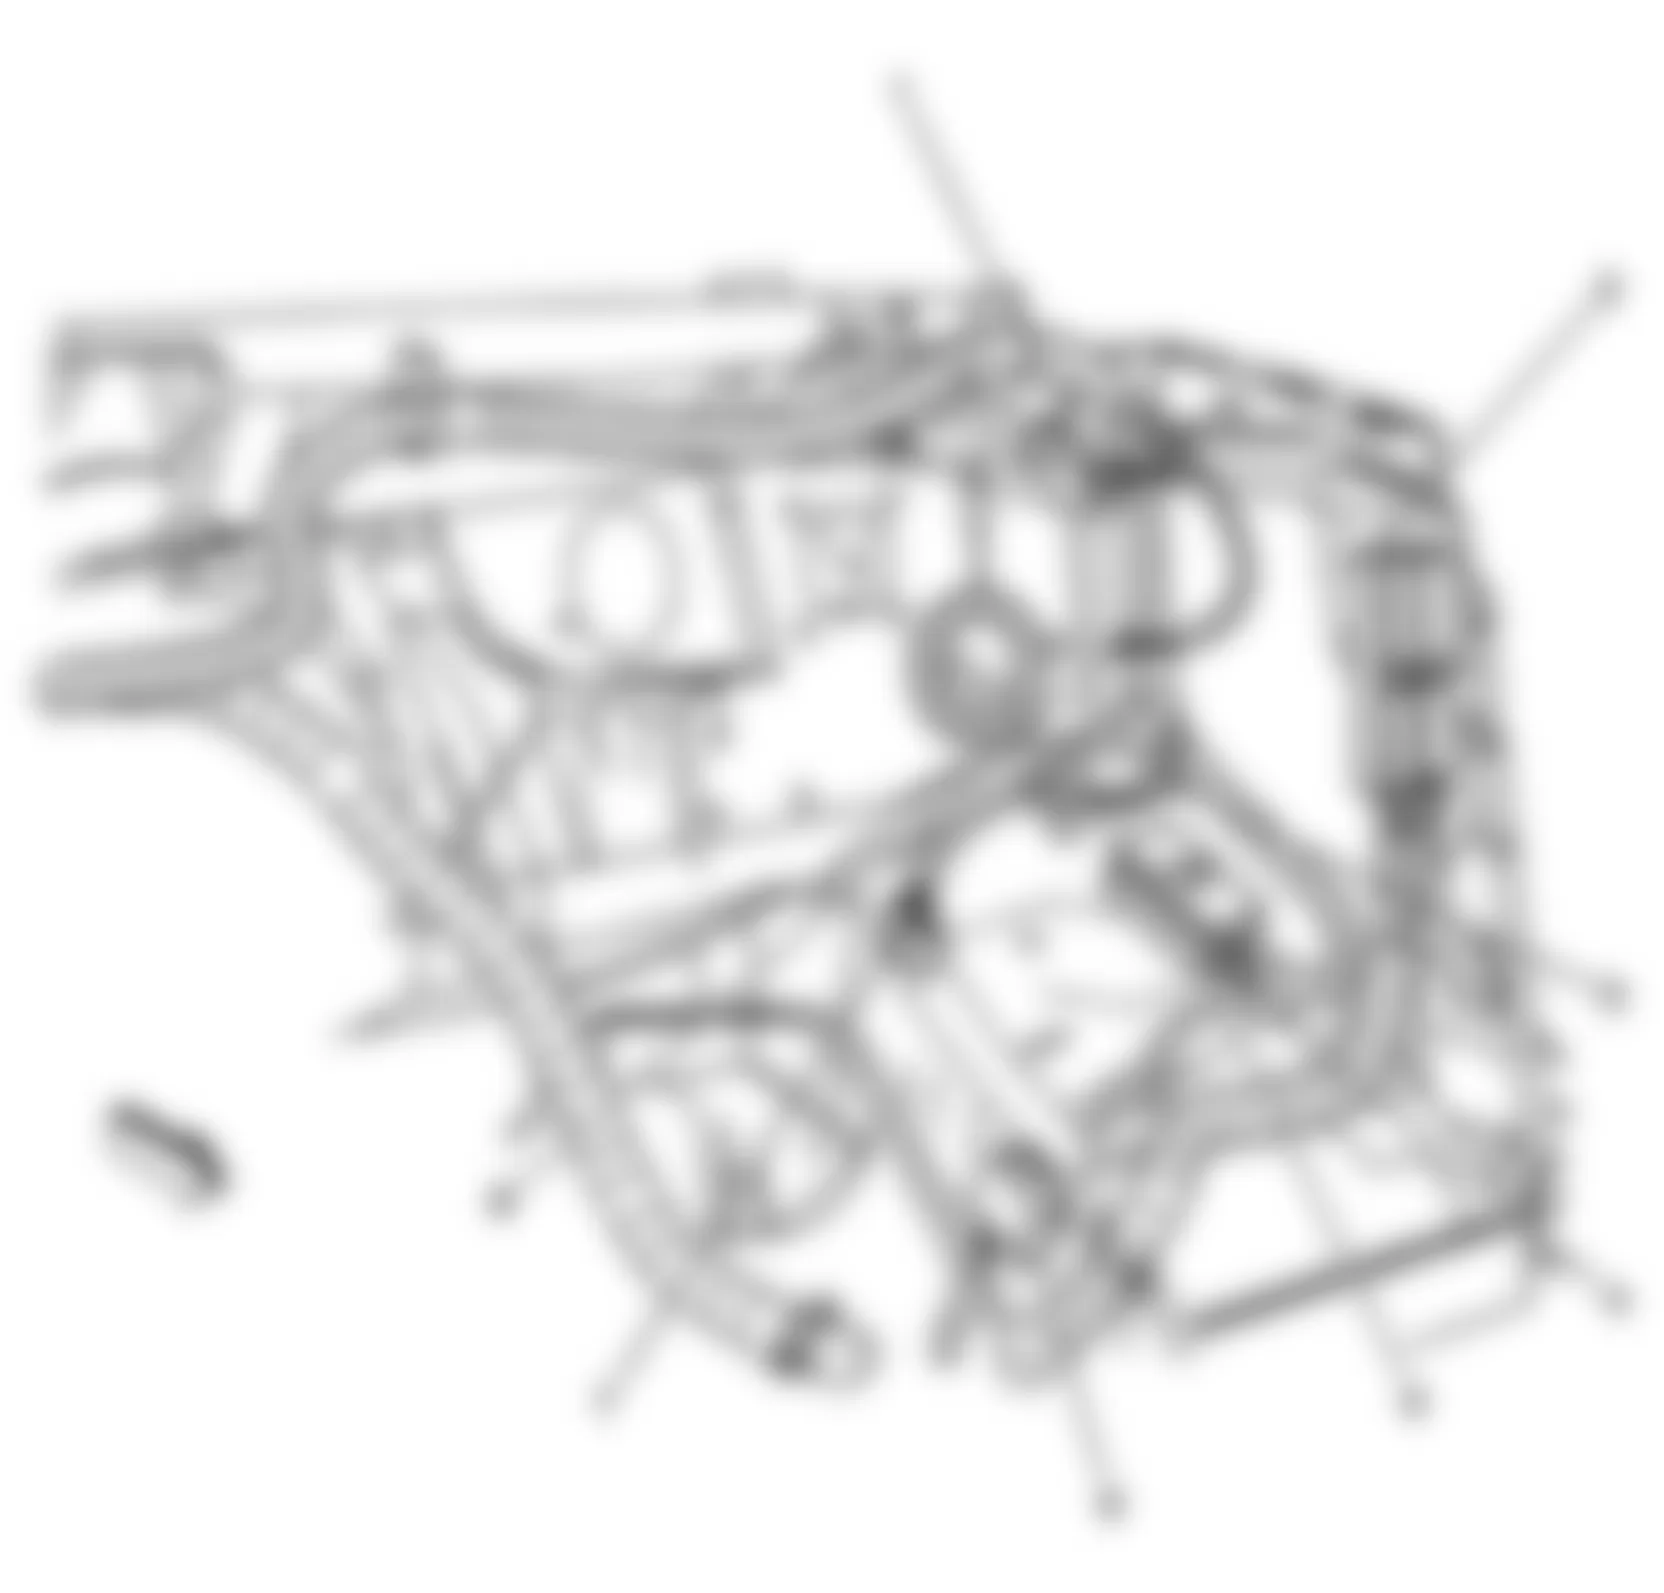 GMC Savana H1500 2009 - Component Locations -  Left Rear Of Engine Compartment